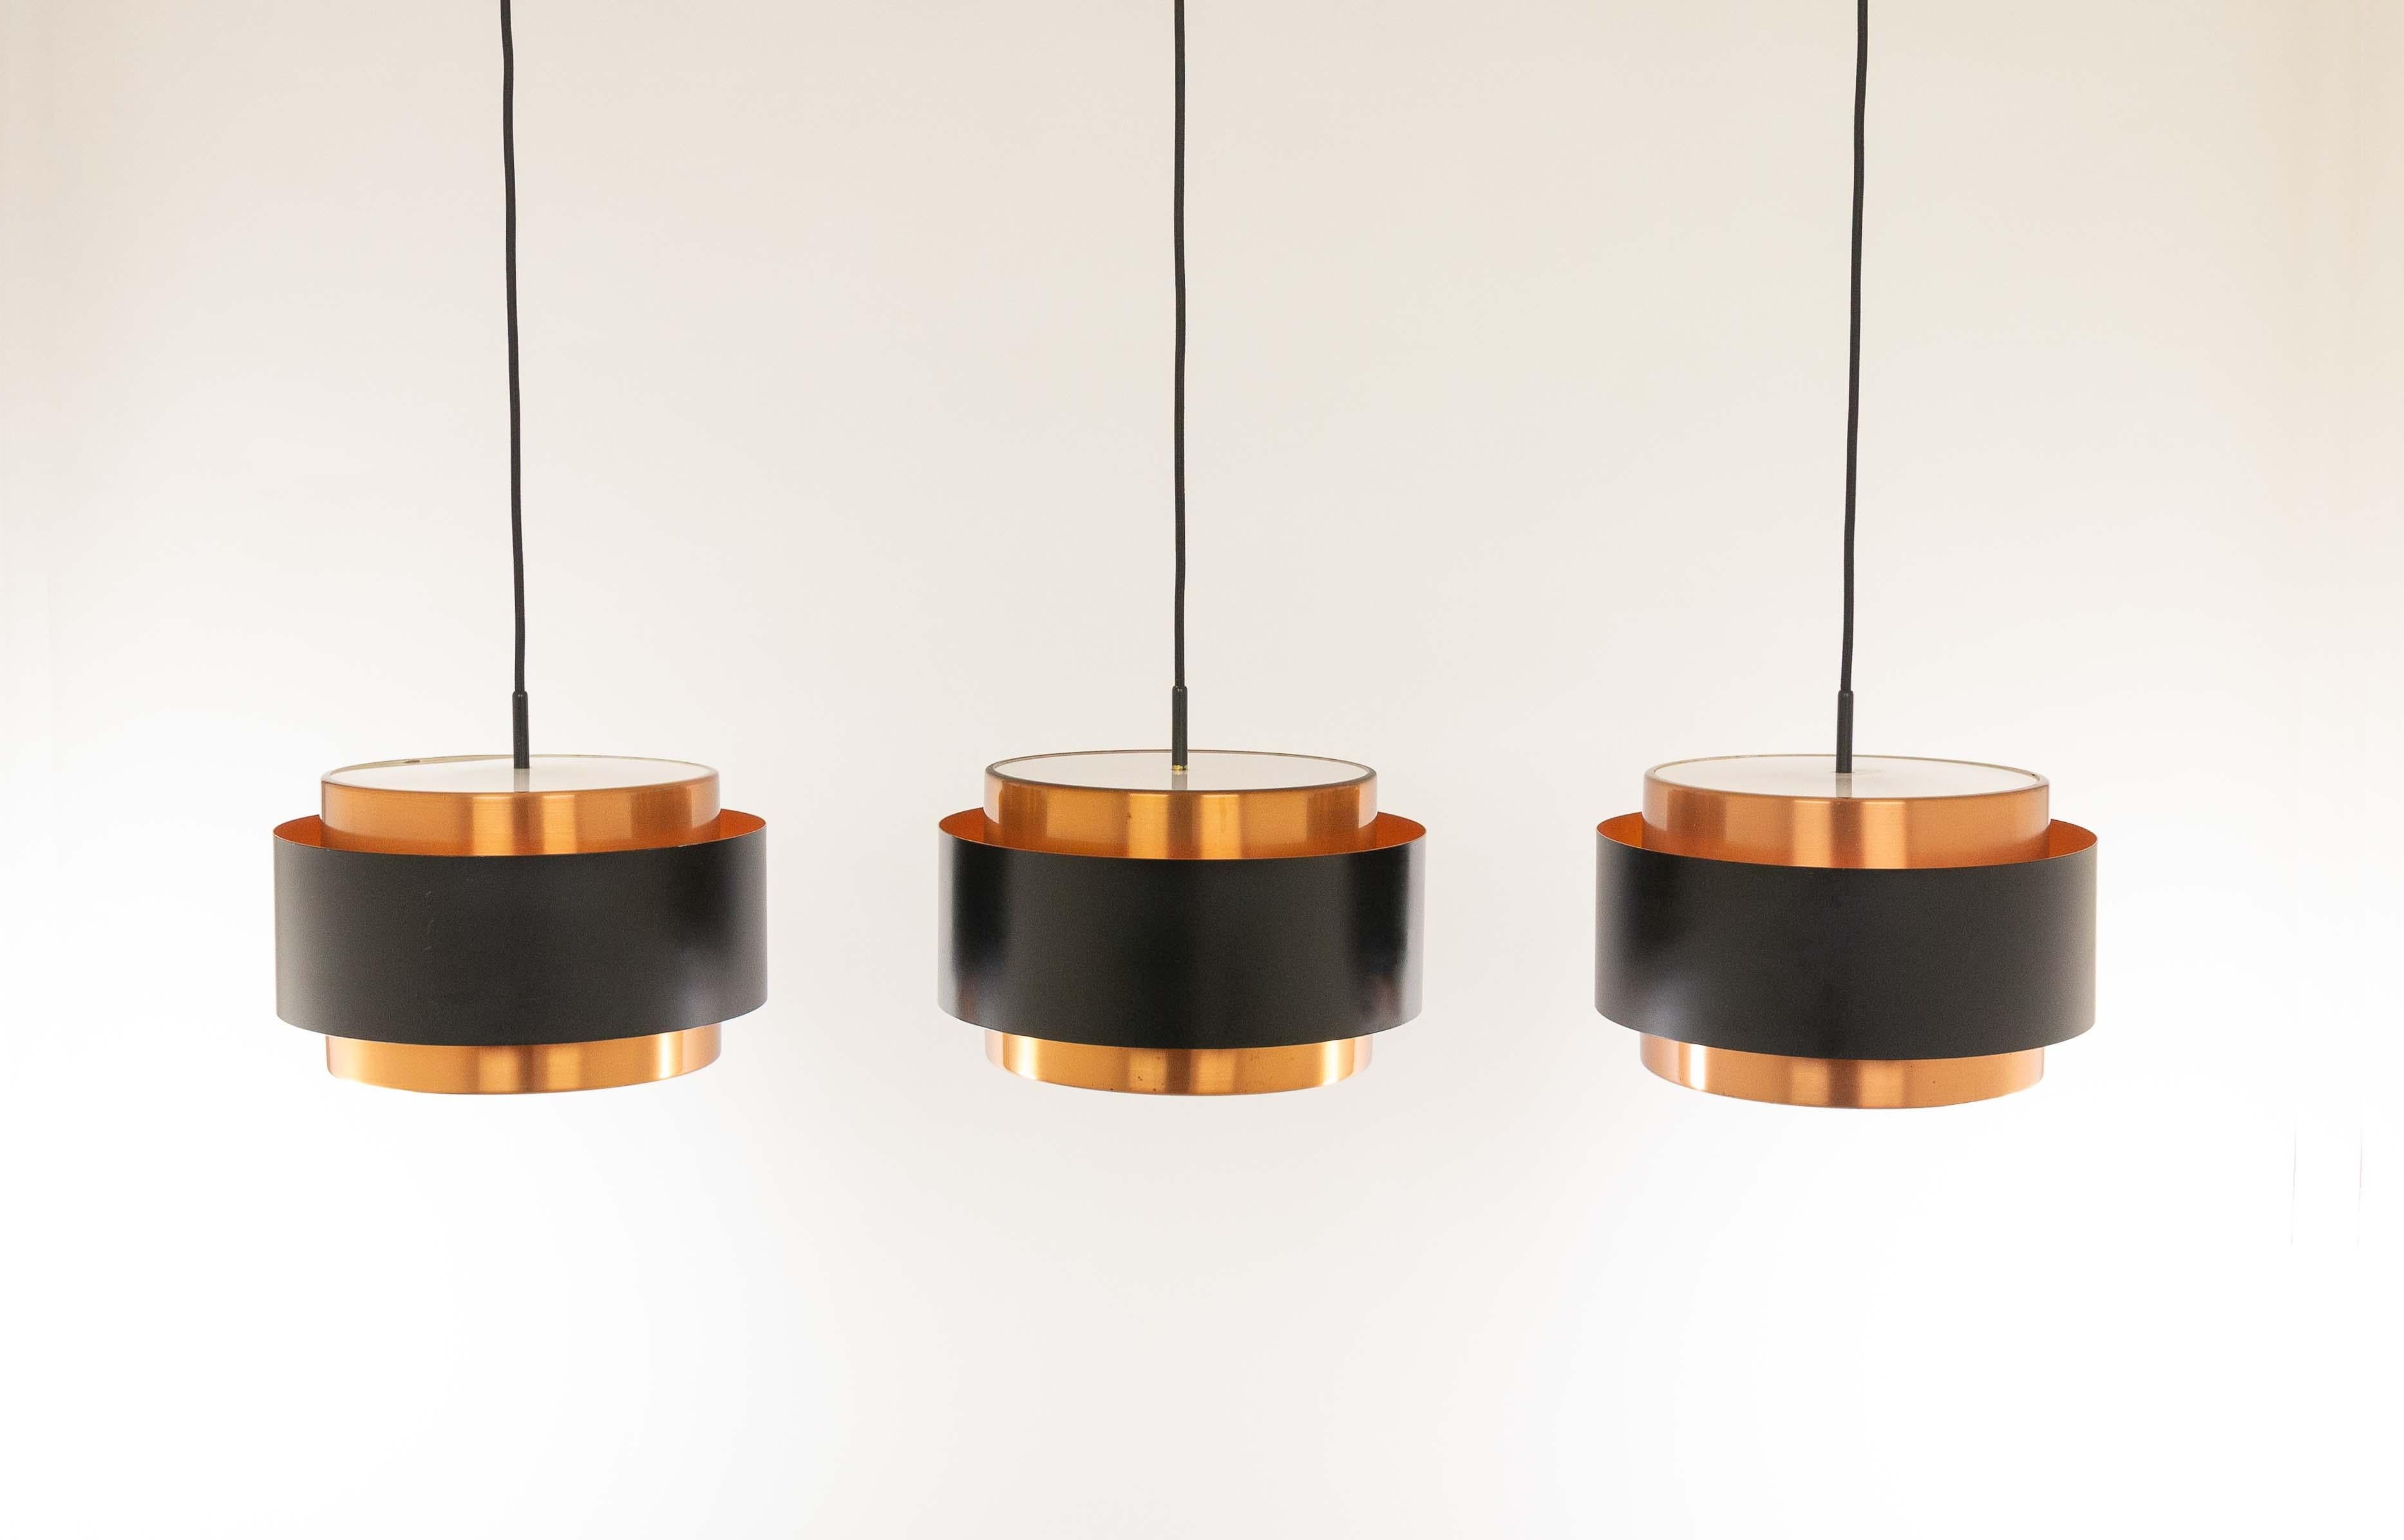 Three Saturn pendants, designed by Danish designer Jo Hammerborg and manufactured by Fog & Mørup.

The model is a structure of two concentric cylindrical copper bands that are held together by a black lacquered band. At the top and the bottom, the